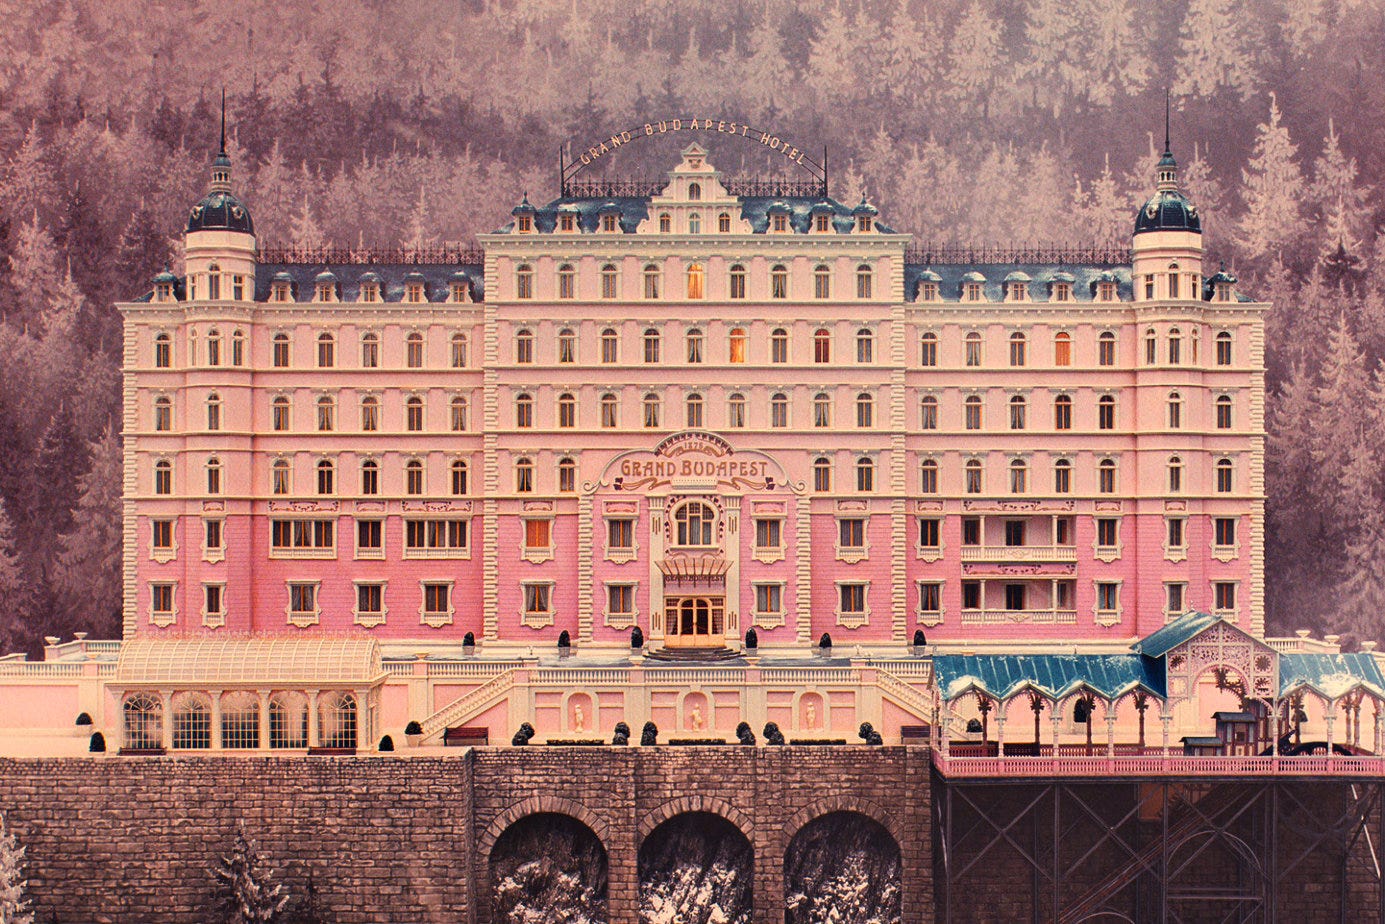 The pink exterior of Wes Anderson's The Grand Budapest Hotel.